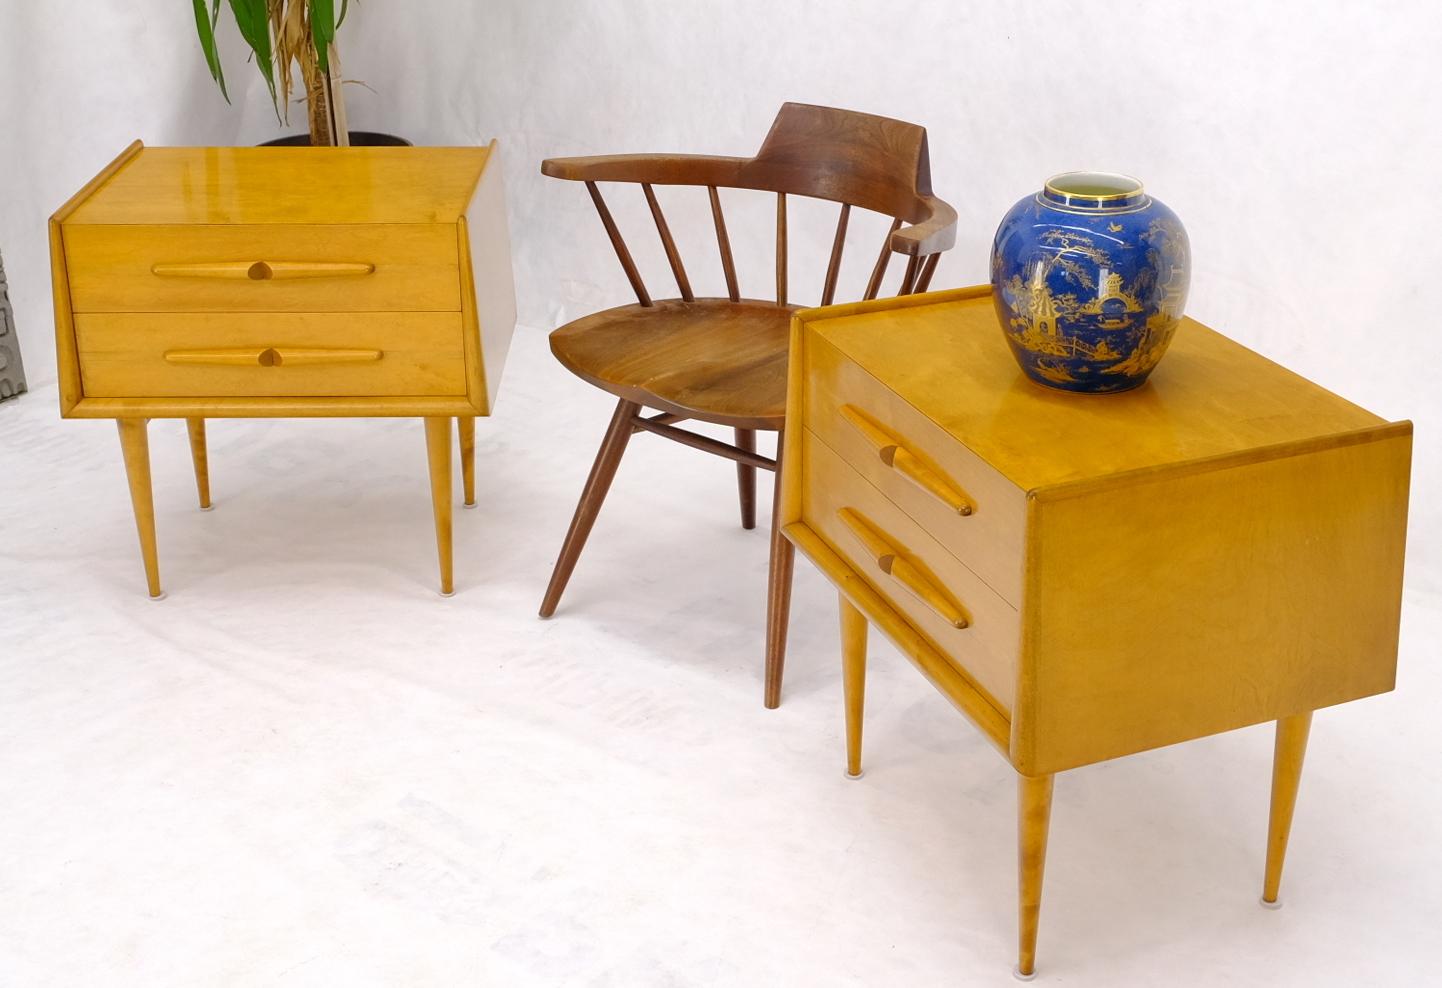 Pair of Swedish Mid-Century Modern honey amber tone two drawers night stands end tables by Edmond Spence.